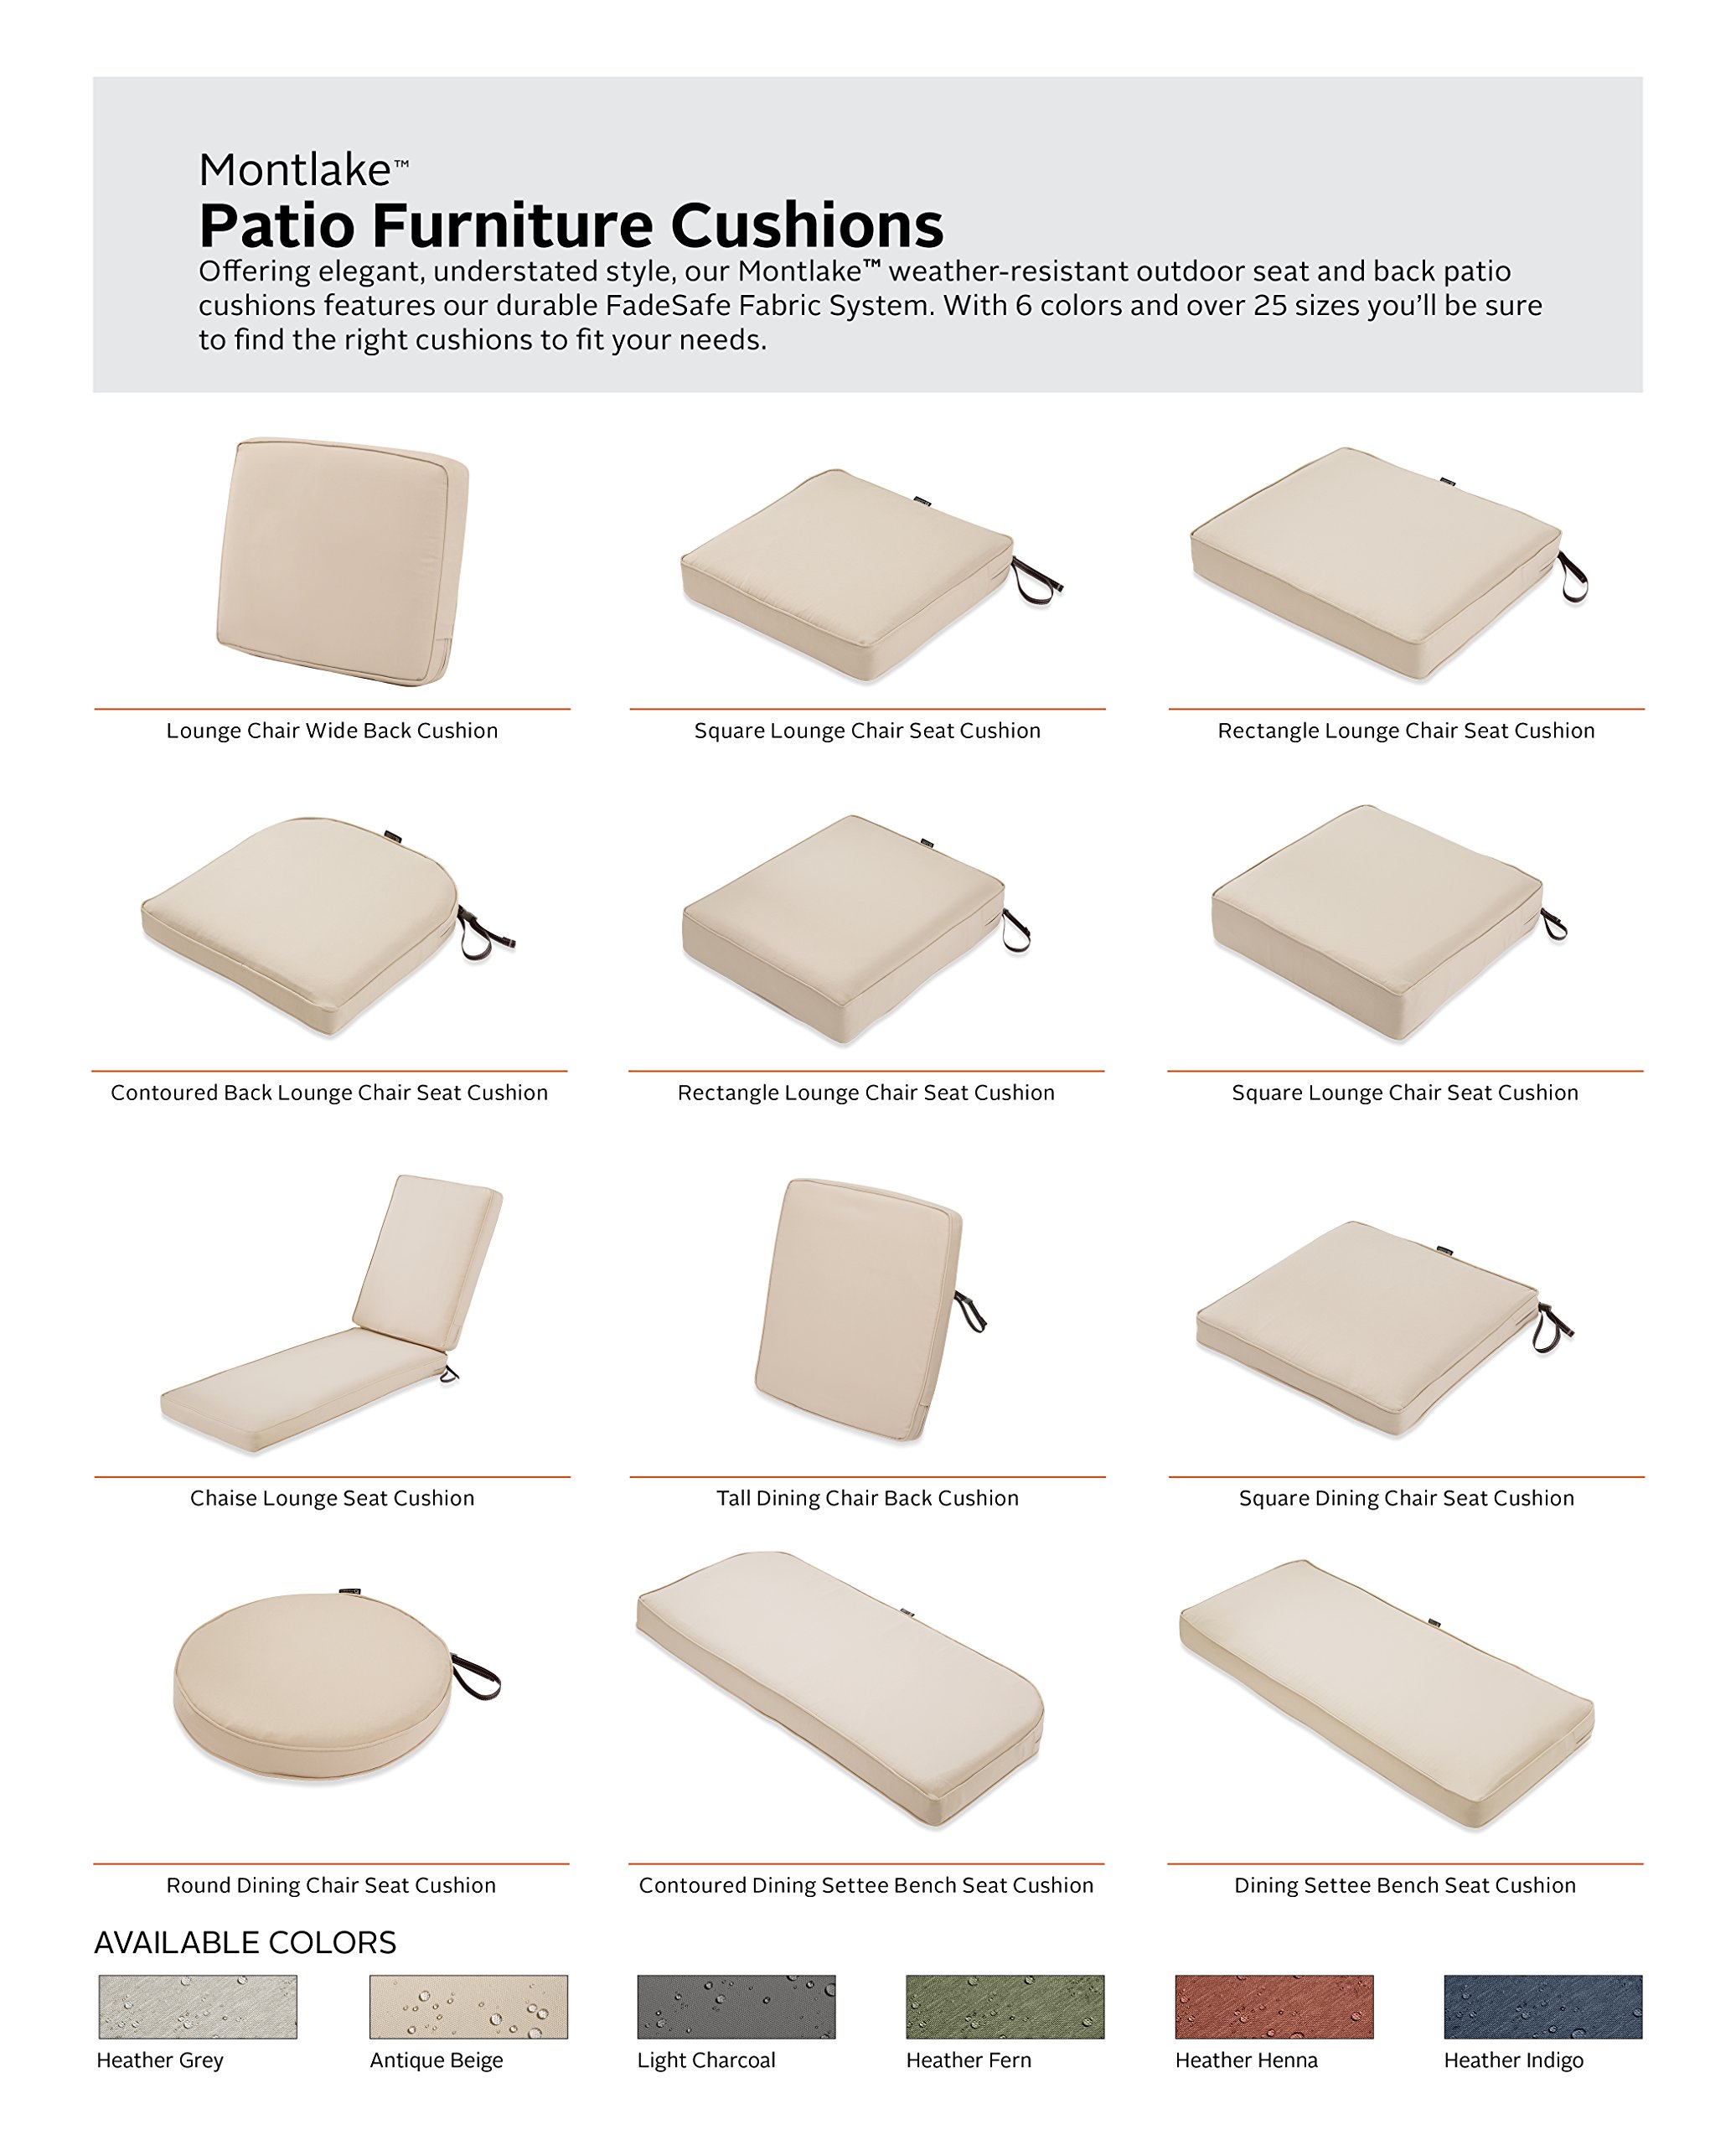 Classic Accessories Montlake FadeSafe Water-Resistant 25 x 27 x 5 Inch Rectangle Outdoor Seat Cushion Slip Cover, Patio Furniture Chair Cushion Cover, Antique Beige, Patio Furniture Cushion Covers